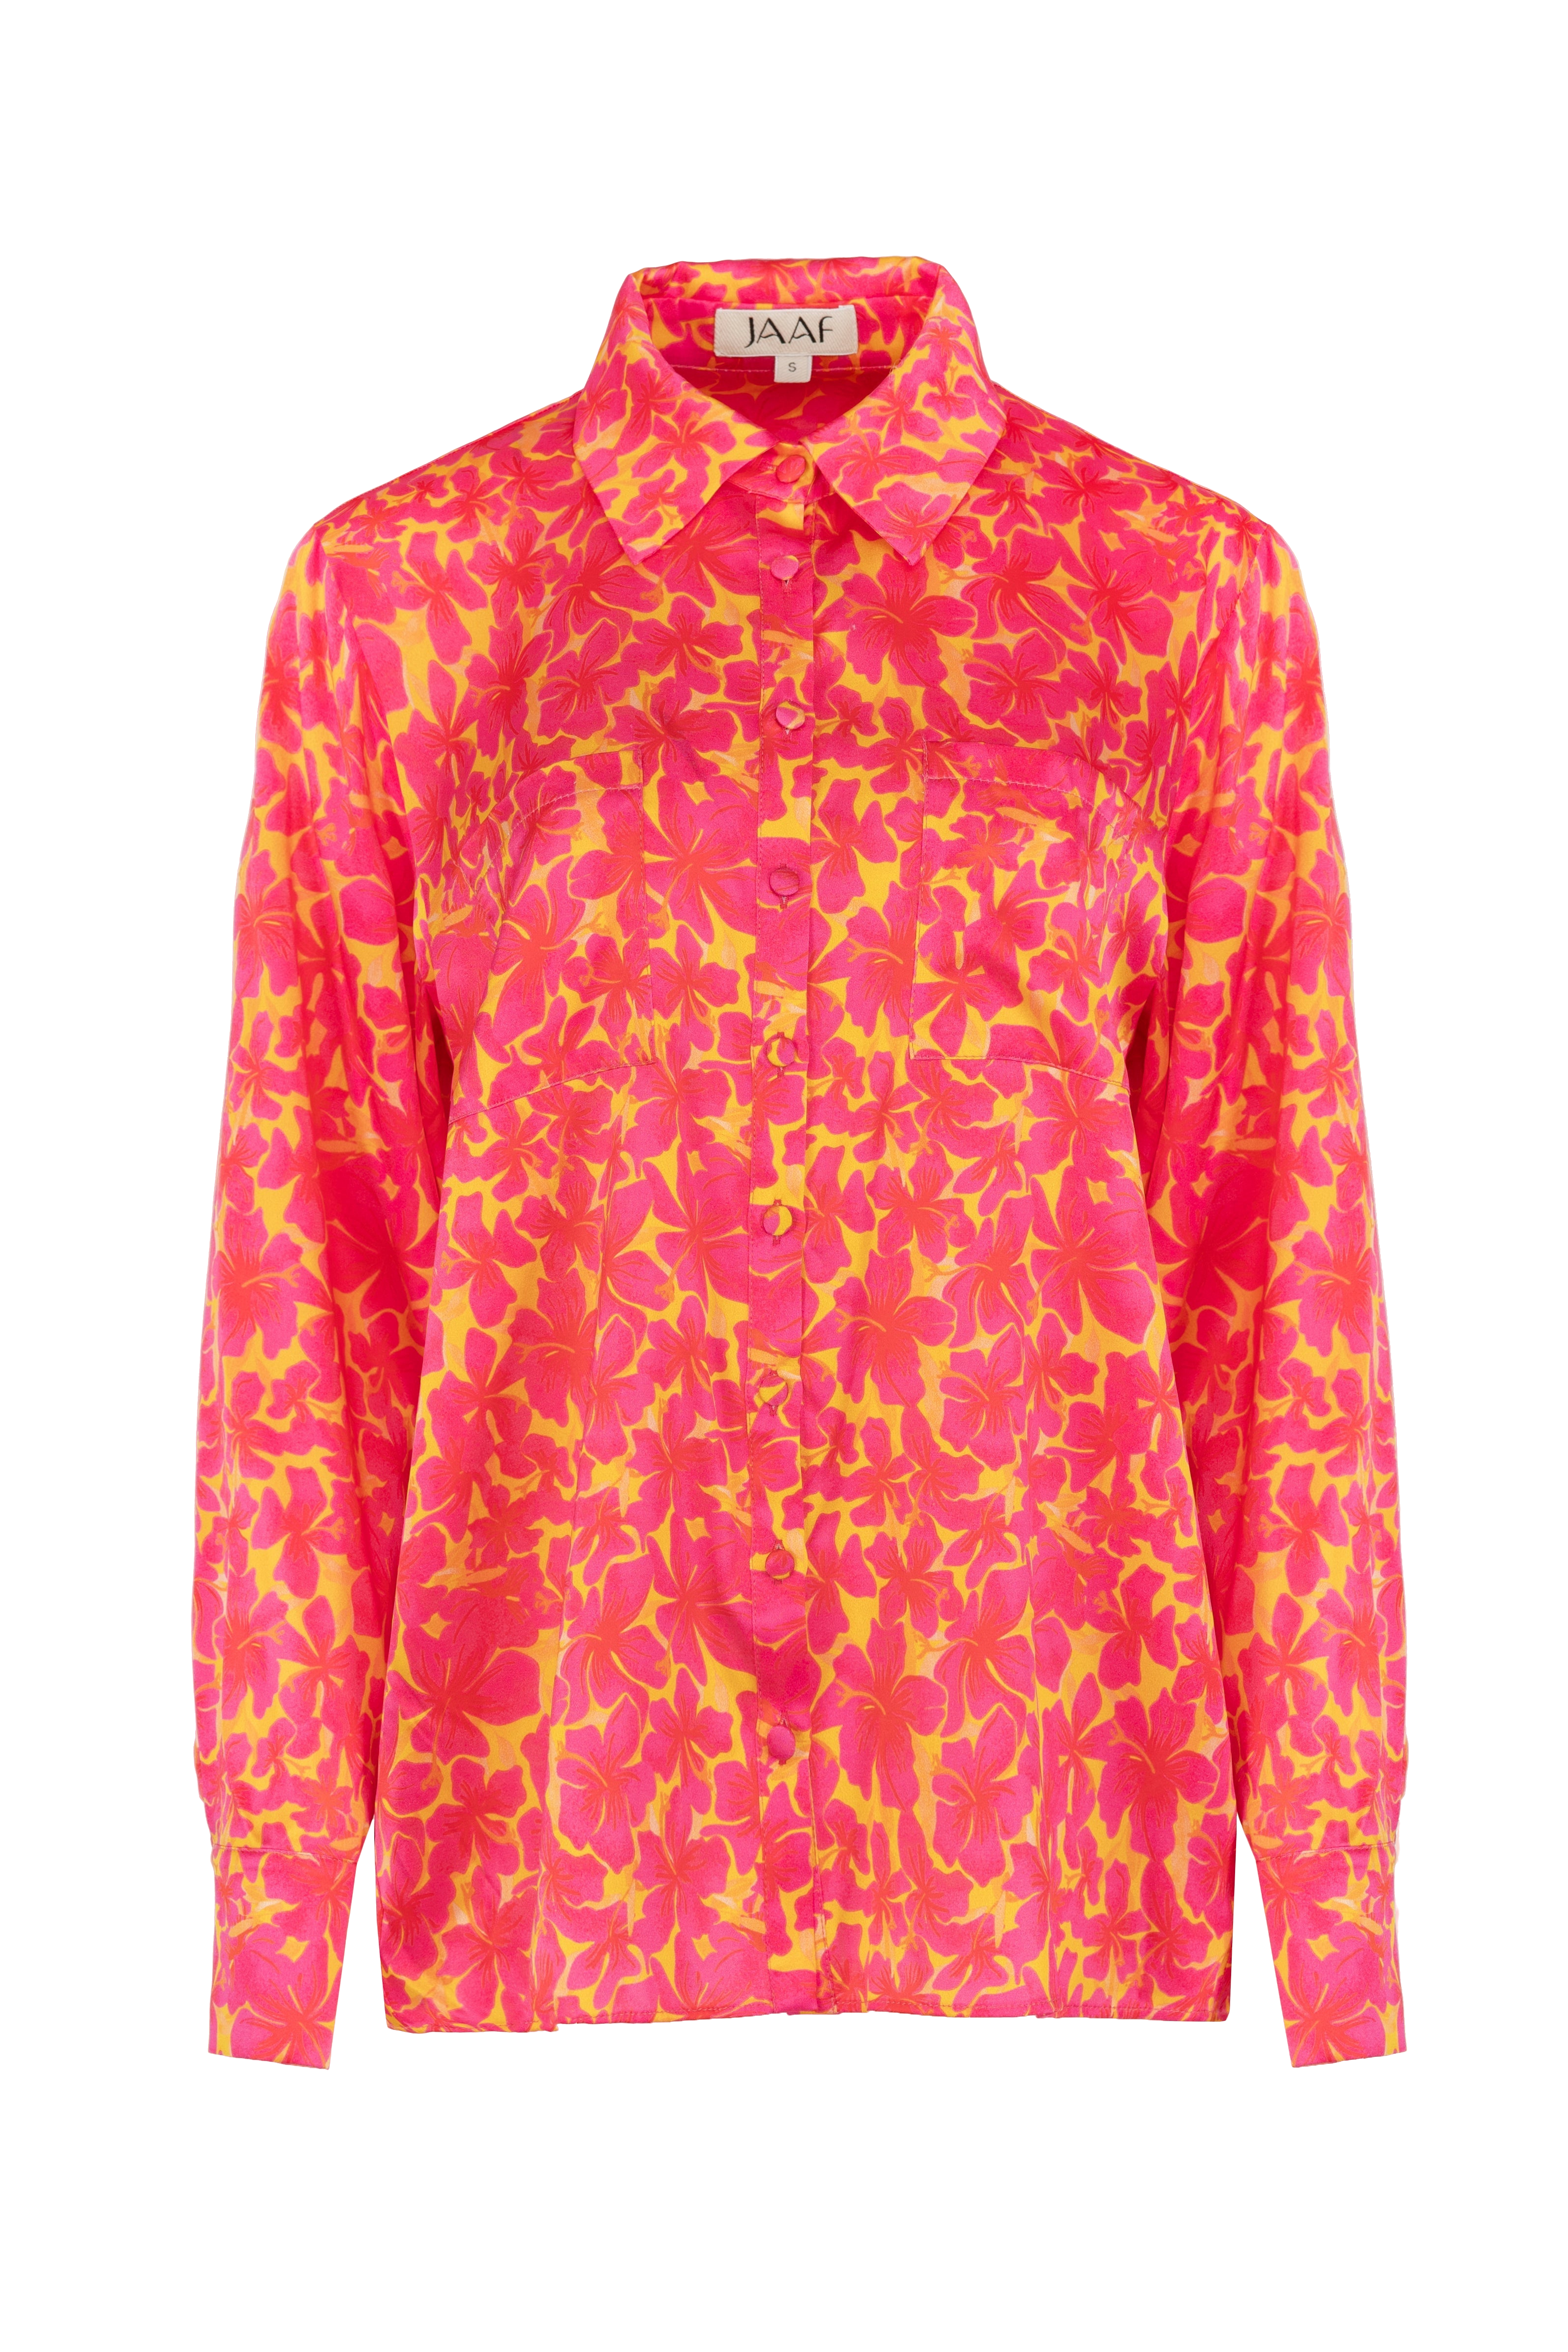 Jaaf Oversized Silk Shirt In Hibiscus Print In Red